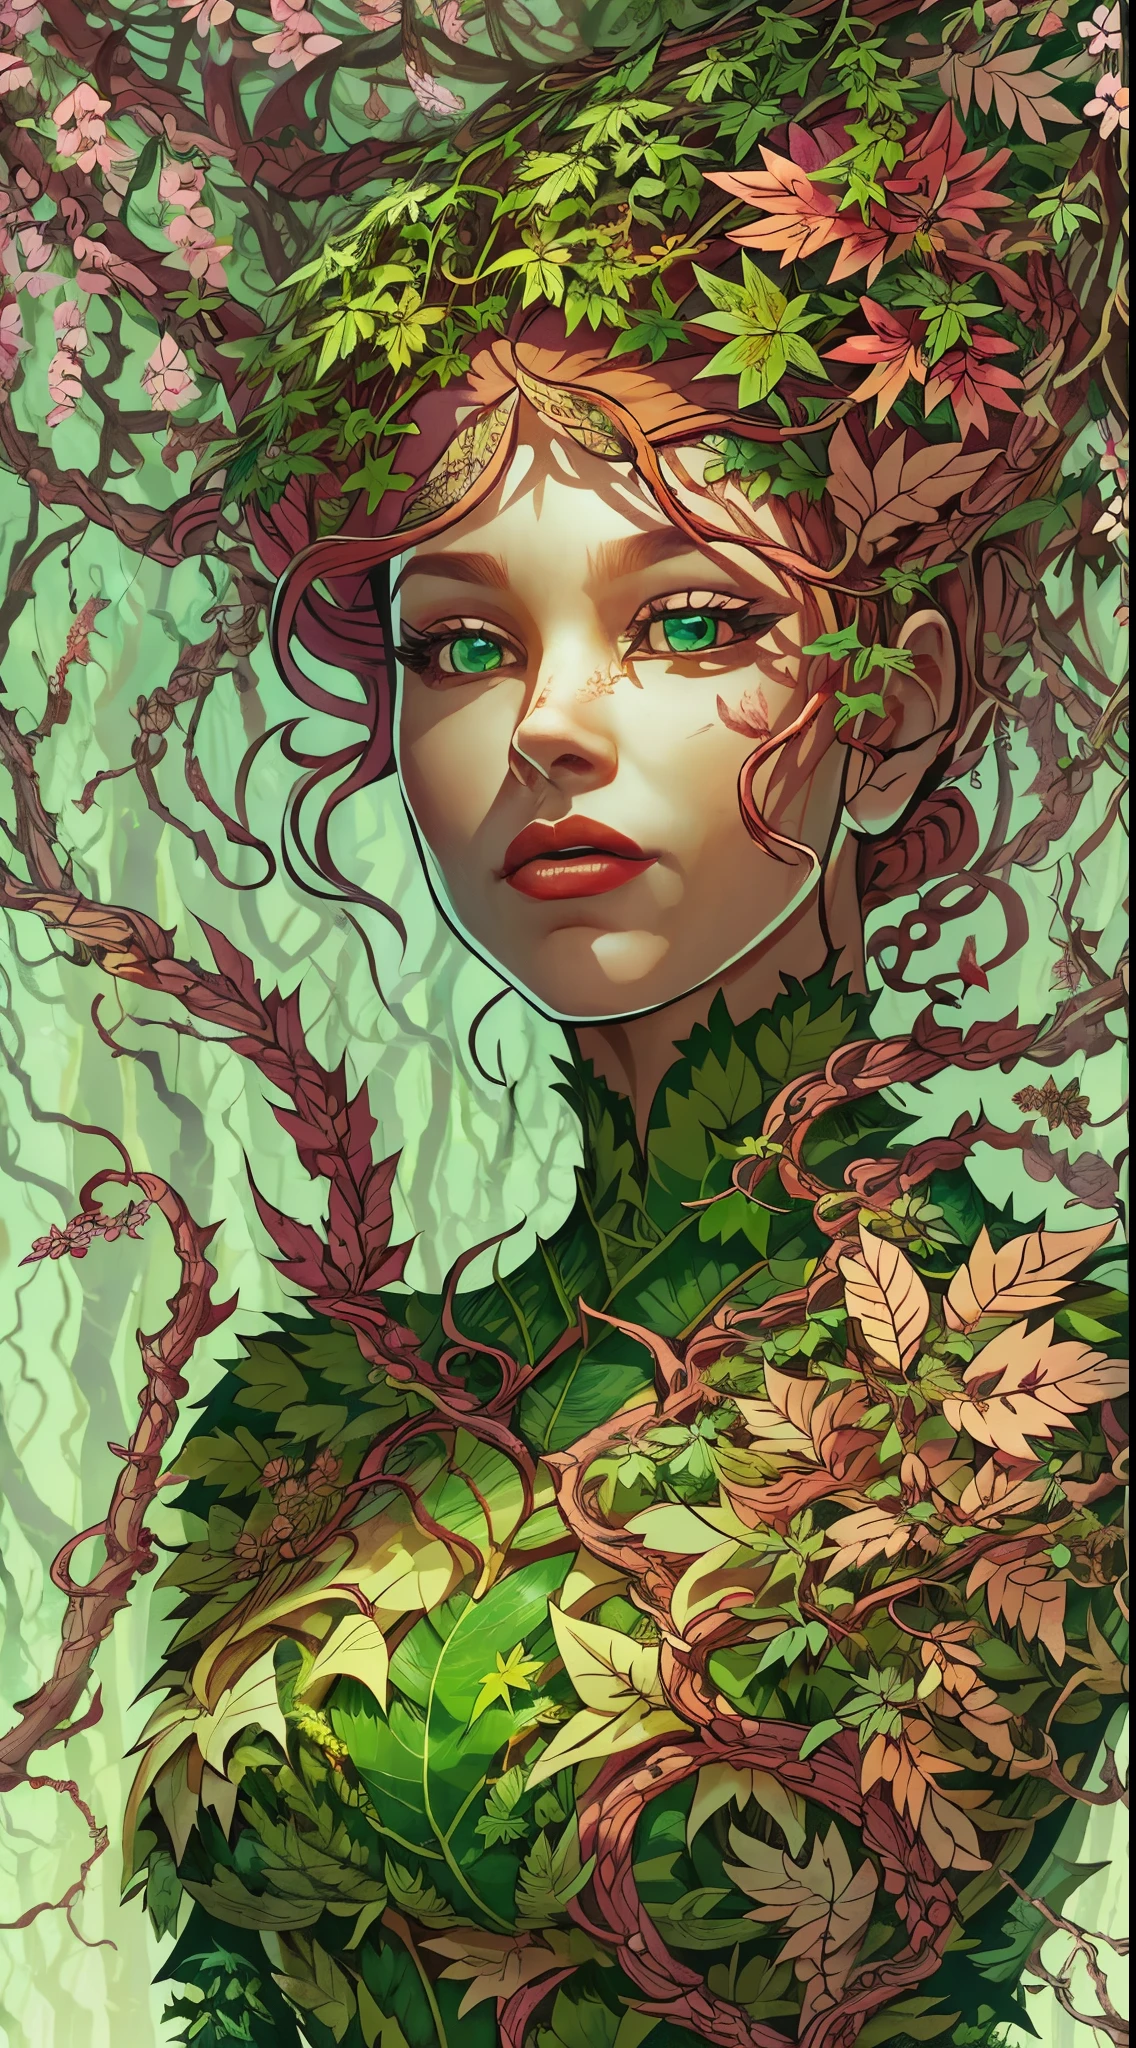 (mother of nature,green skin:green:1.1,red head:1.1) A mesmerizing image of Poison Ivy comes to life in vivid colors. Her beautiful, pale green skin stands out, radiating an ethereal glow. Her hair, a fiery red cascade, frames her face with wild elegance. Looking closer, you notice her enchanting eyes, filled with both mystery and power.

She stands confidently, her figure adorned with lingerie made entirely of intricately crafted leaves. Each leaf is carefully placed, forming a mesmerizing pattern that accentuates her natural beauty. The leaves, in various shades of green, seem to mimic the plants surrounding her, perfectly blending her with the lush environment.

Poison Ivy extends her hand, effortlessly commanding the plants around her. Green vines sprout from the ground, twisting and curving under her control. They dance gracefully in the air, forming intricate patterns and shapes. Some vines reach towards her, while others create an enchanting canopy above her, casting wavy shadows on her face.

The air is filled with the scent of nature, fresh and invigorating. The atmosphere seems to vibrate with life, as the leaves rustle softly in the gentle breeze. The surroundings are an oasis of greenery, with an abundance of vibrant plants and foliage that stretch as far as the eye can see.

In this masterpiece of art, the level of detail is astonishing. Every aspect of Poison Ivy, down to the tiniest veins on the leaves, is defined with precision and realism. The lighting is carefully crafted, illuminating her delicate features and enhancing the overall atmosphere. The colors are vivid and rich, showcasing the beauty of the natural world that she commands.

As you gaze at this stunning artwork, you can't help but be captivated by the allure and power of Poison Ivy, the Mother of Nature. She embodies the essence of the wild and the untamed, a force to be reckoned with.